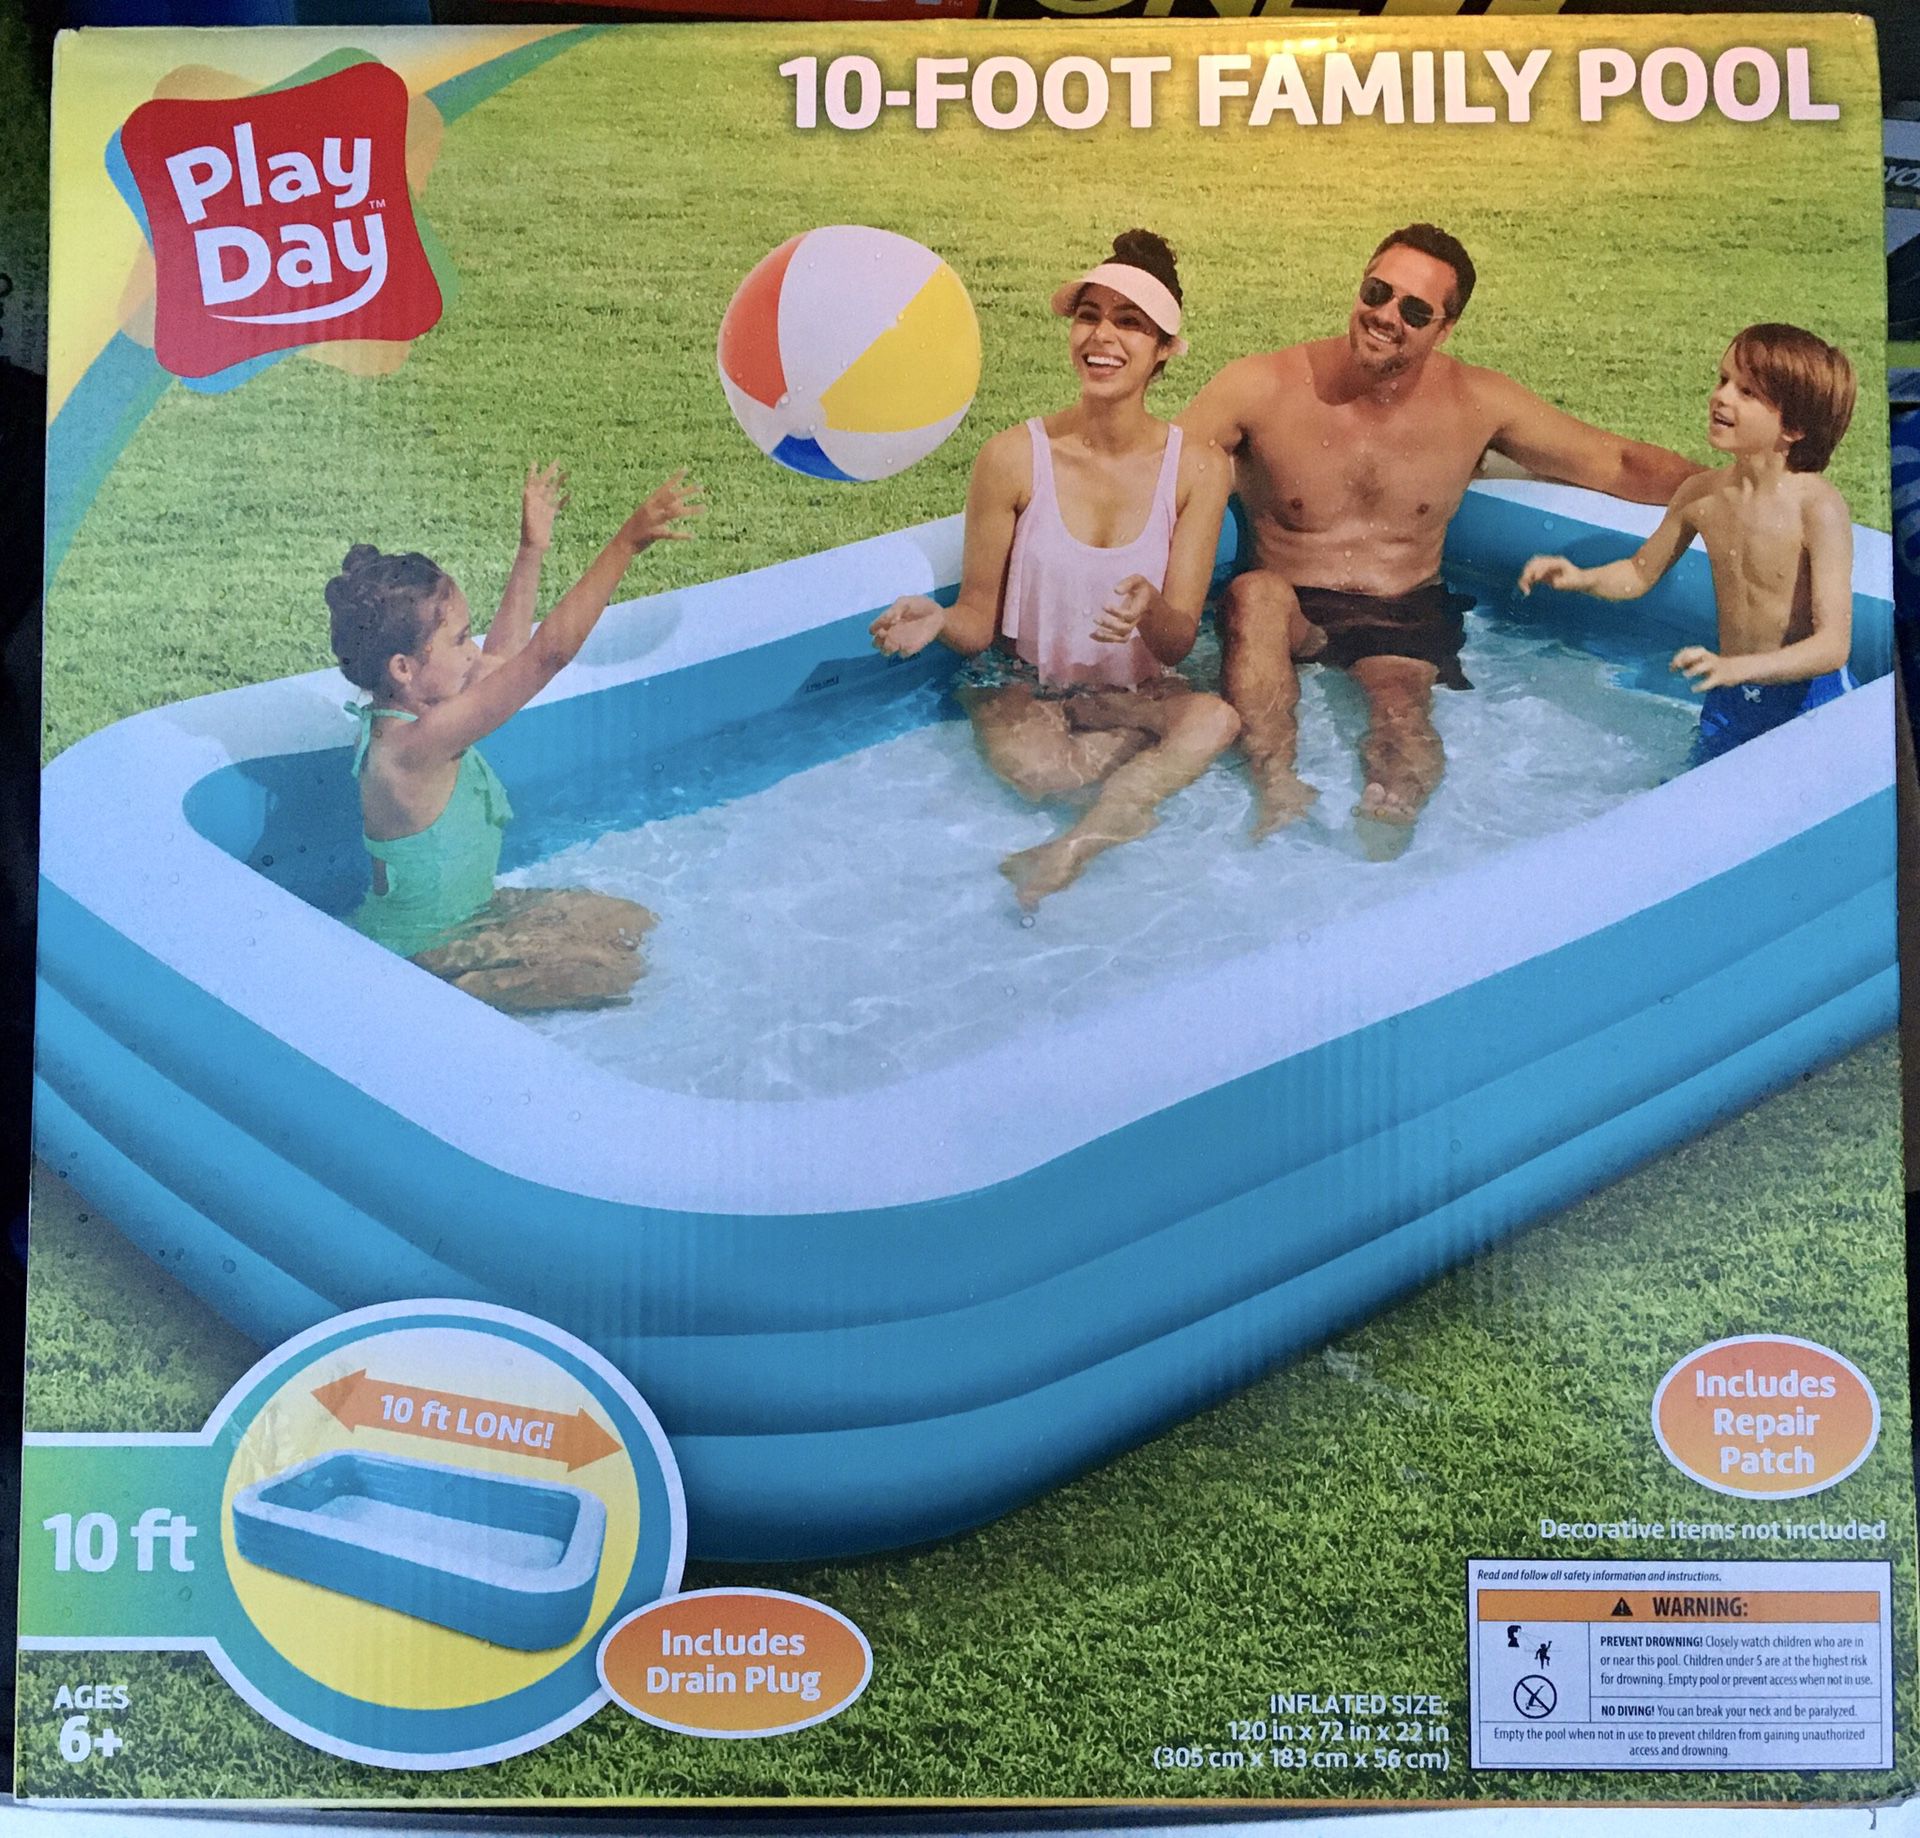 PlayDay 10-foot Family pool (Includes Repair Patch)